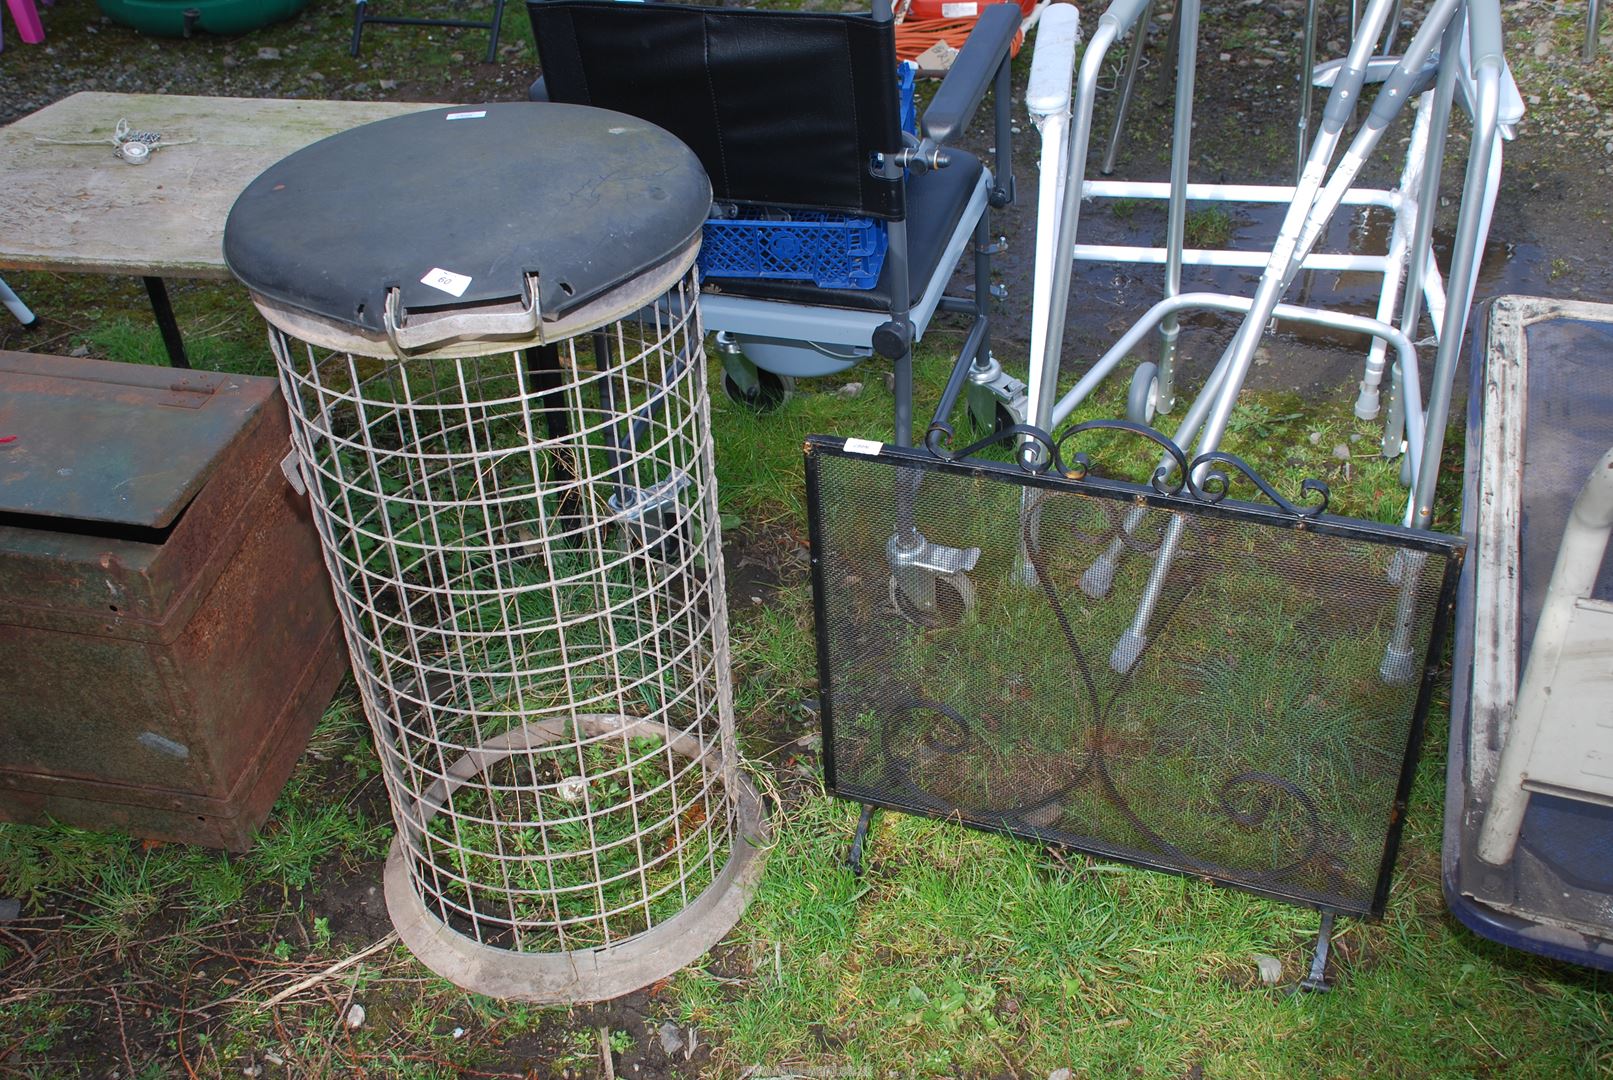 Wrought iron spark guard and galvanised mesh waste paper bin.